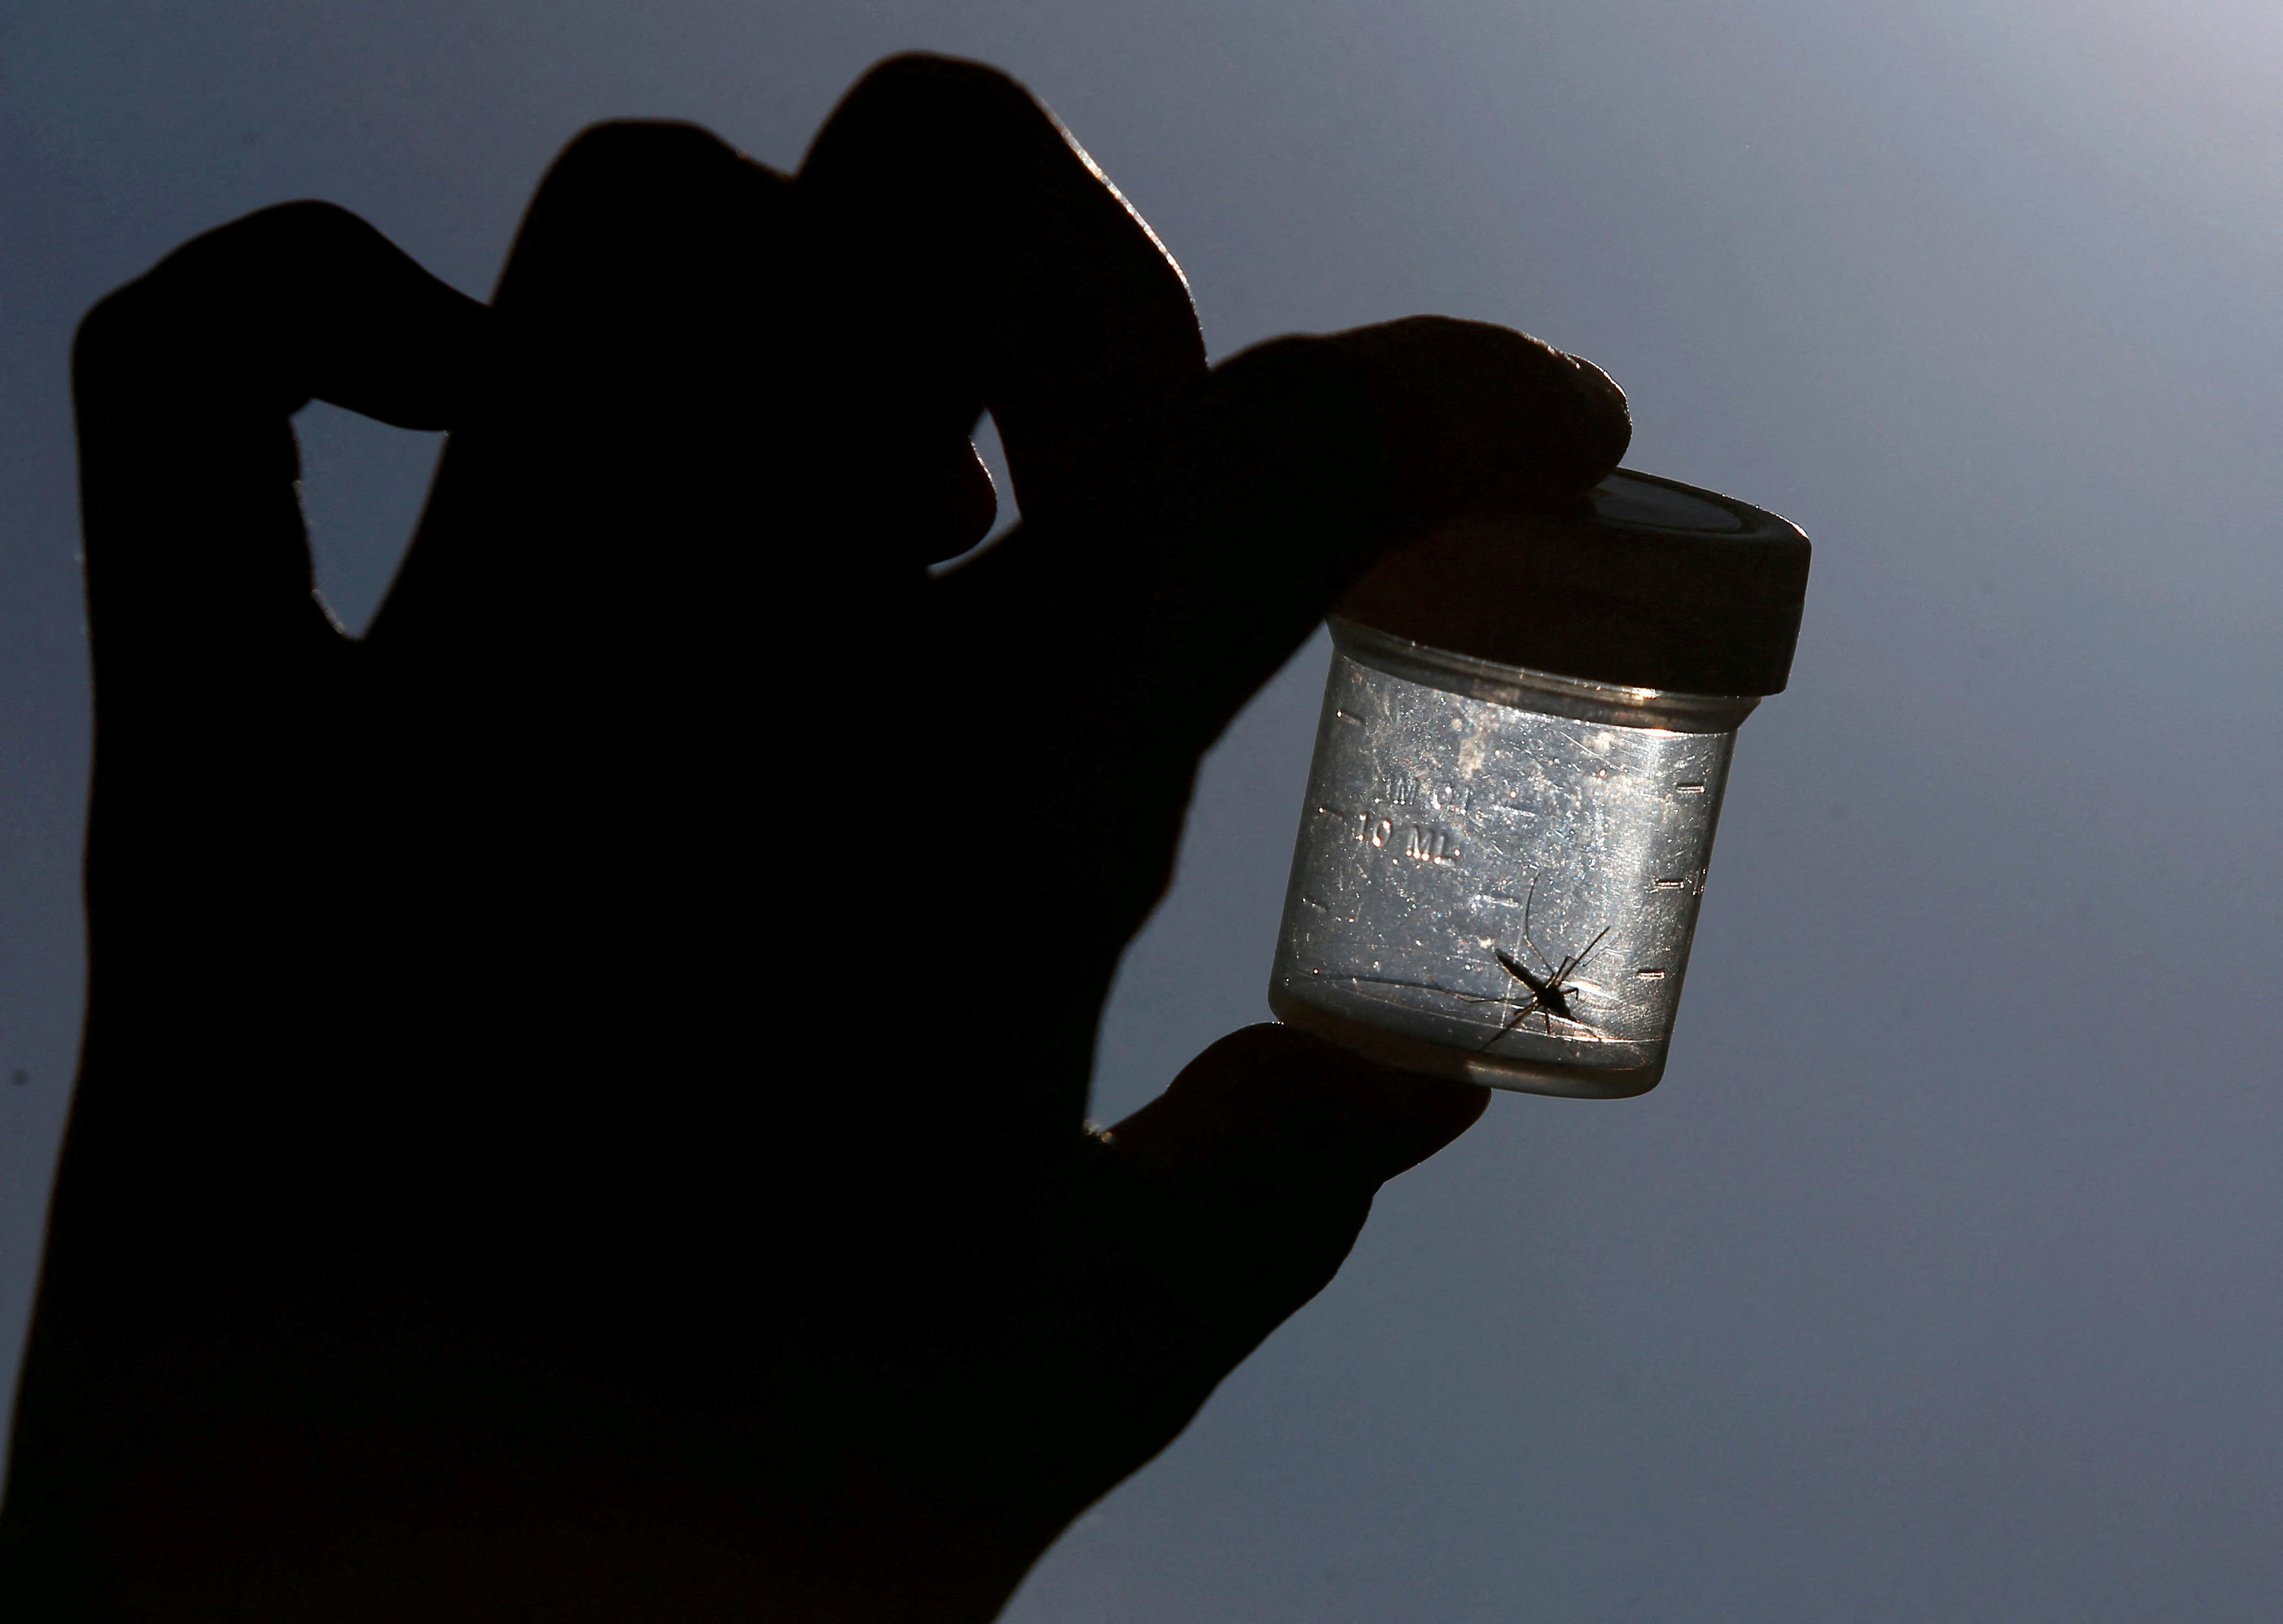 Mosquito is caught in plastic box by German mosquito researcher Kroeger in Leipzig